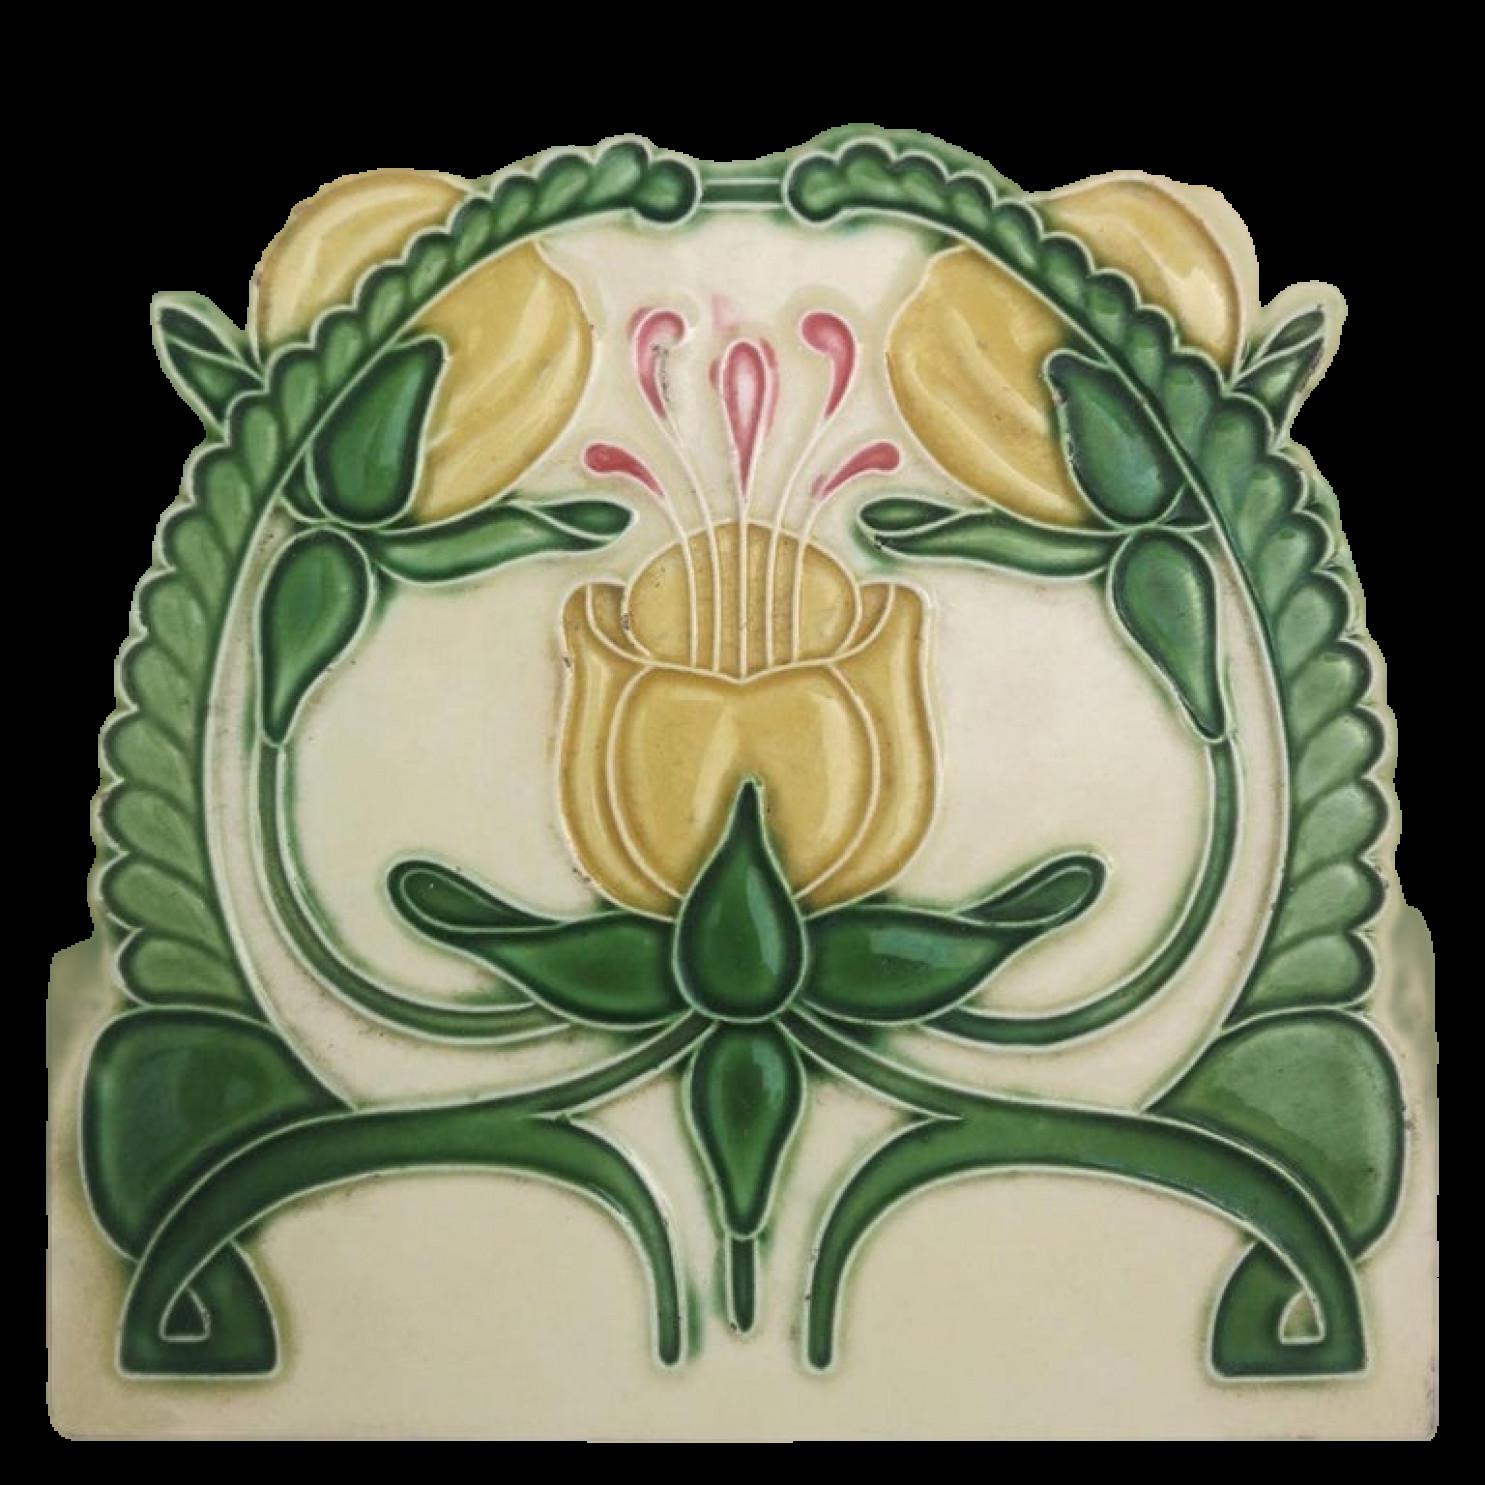 1 of the 20 amazing original antique Art Nouveau handmade tiles manufactured in 1920s by Maison Helman - Céramiques d'Art - St. Agatha-Berchem.

A beautiful relief and deep green, rose and vanilla yellow colors with creme back ground. These tiles